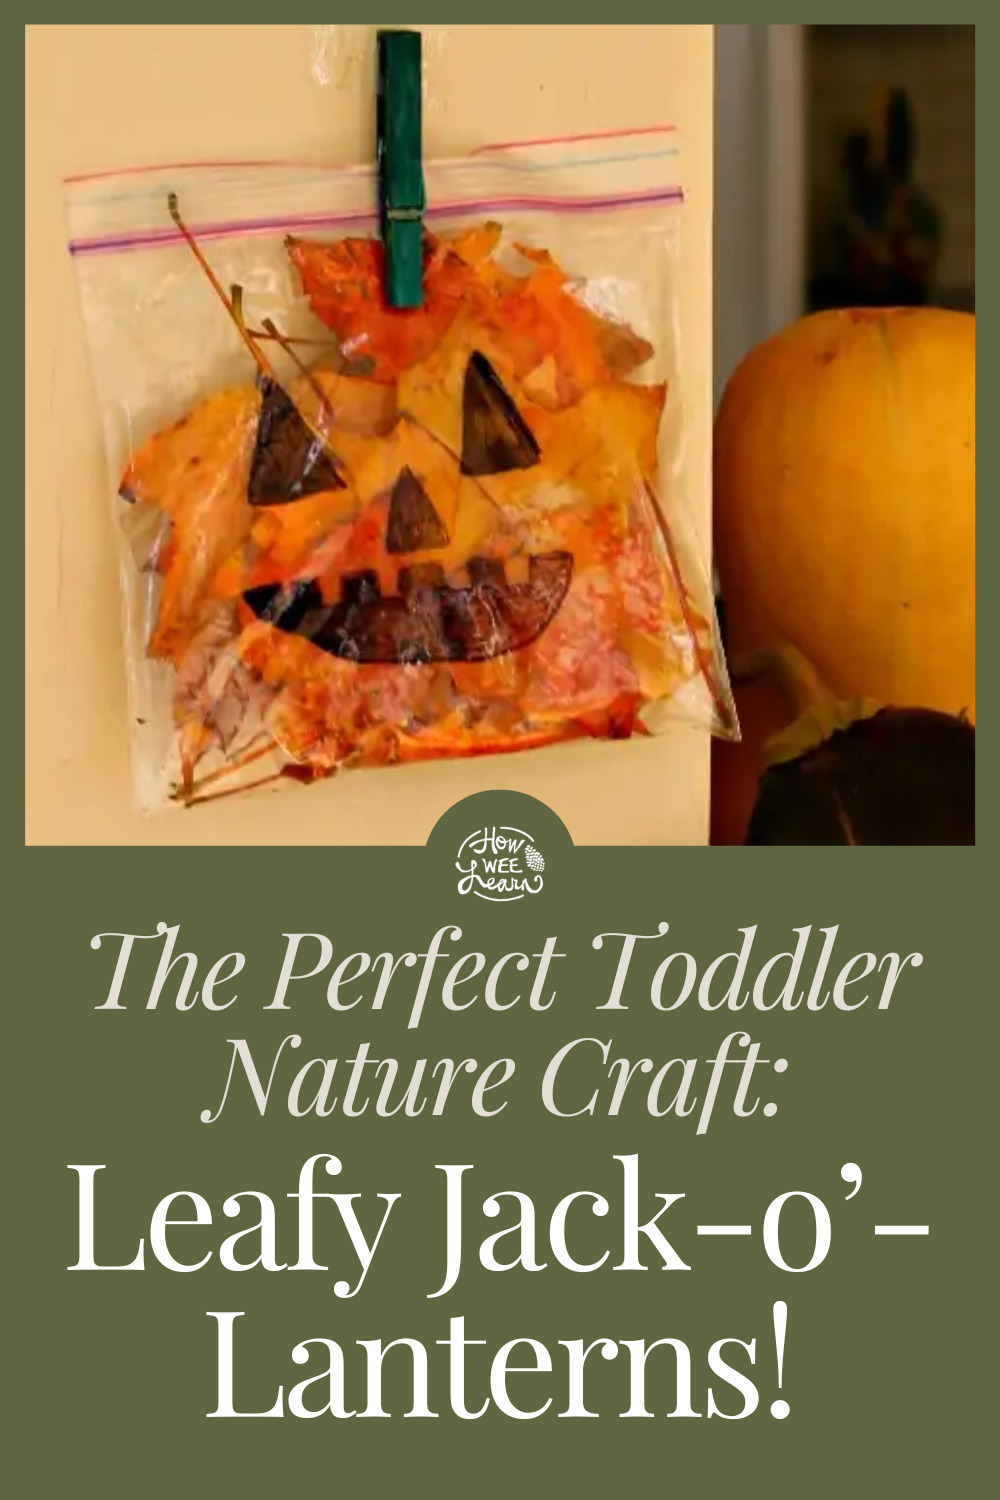 https://www.howweelearn.com/wp-content/uploads/2021/10/the-perfect-toddler-craft-leafy-jack-o-lanterns.jpg